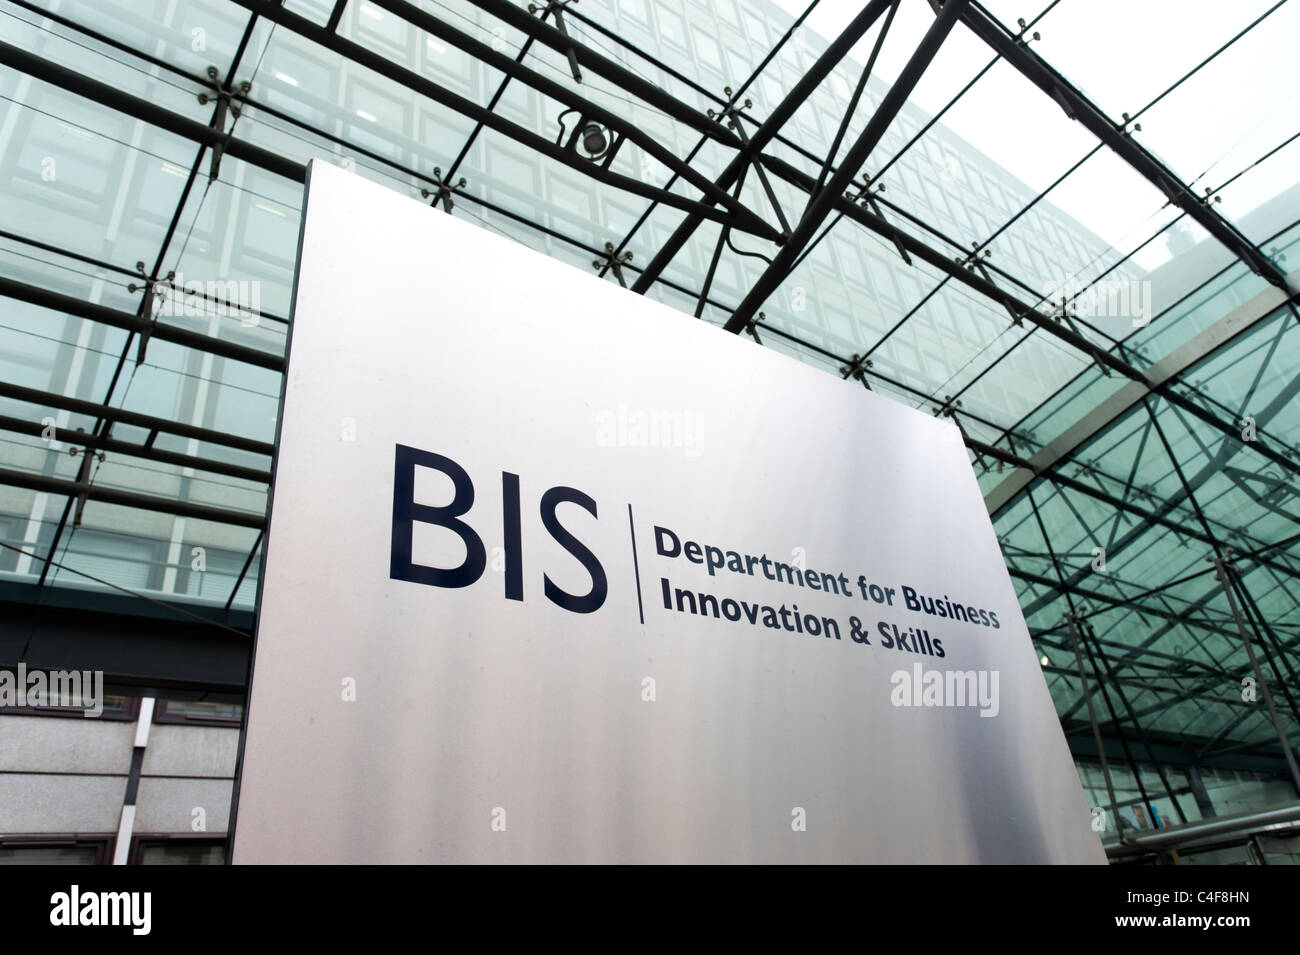 Department for Business Innovation and Skills, London, UK Stock Photo